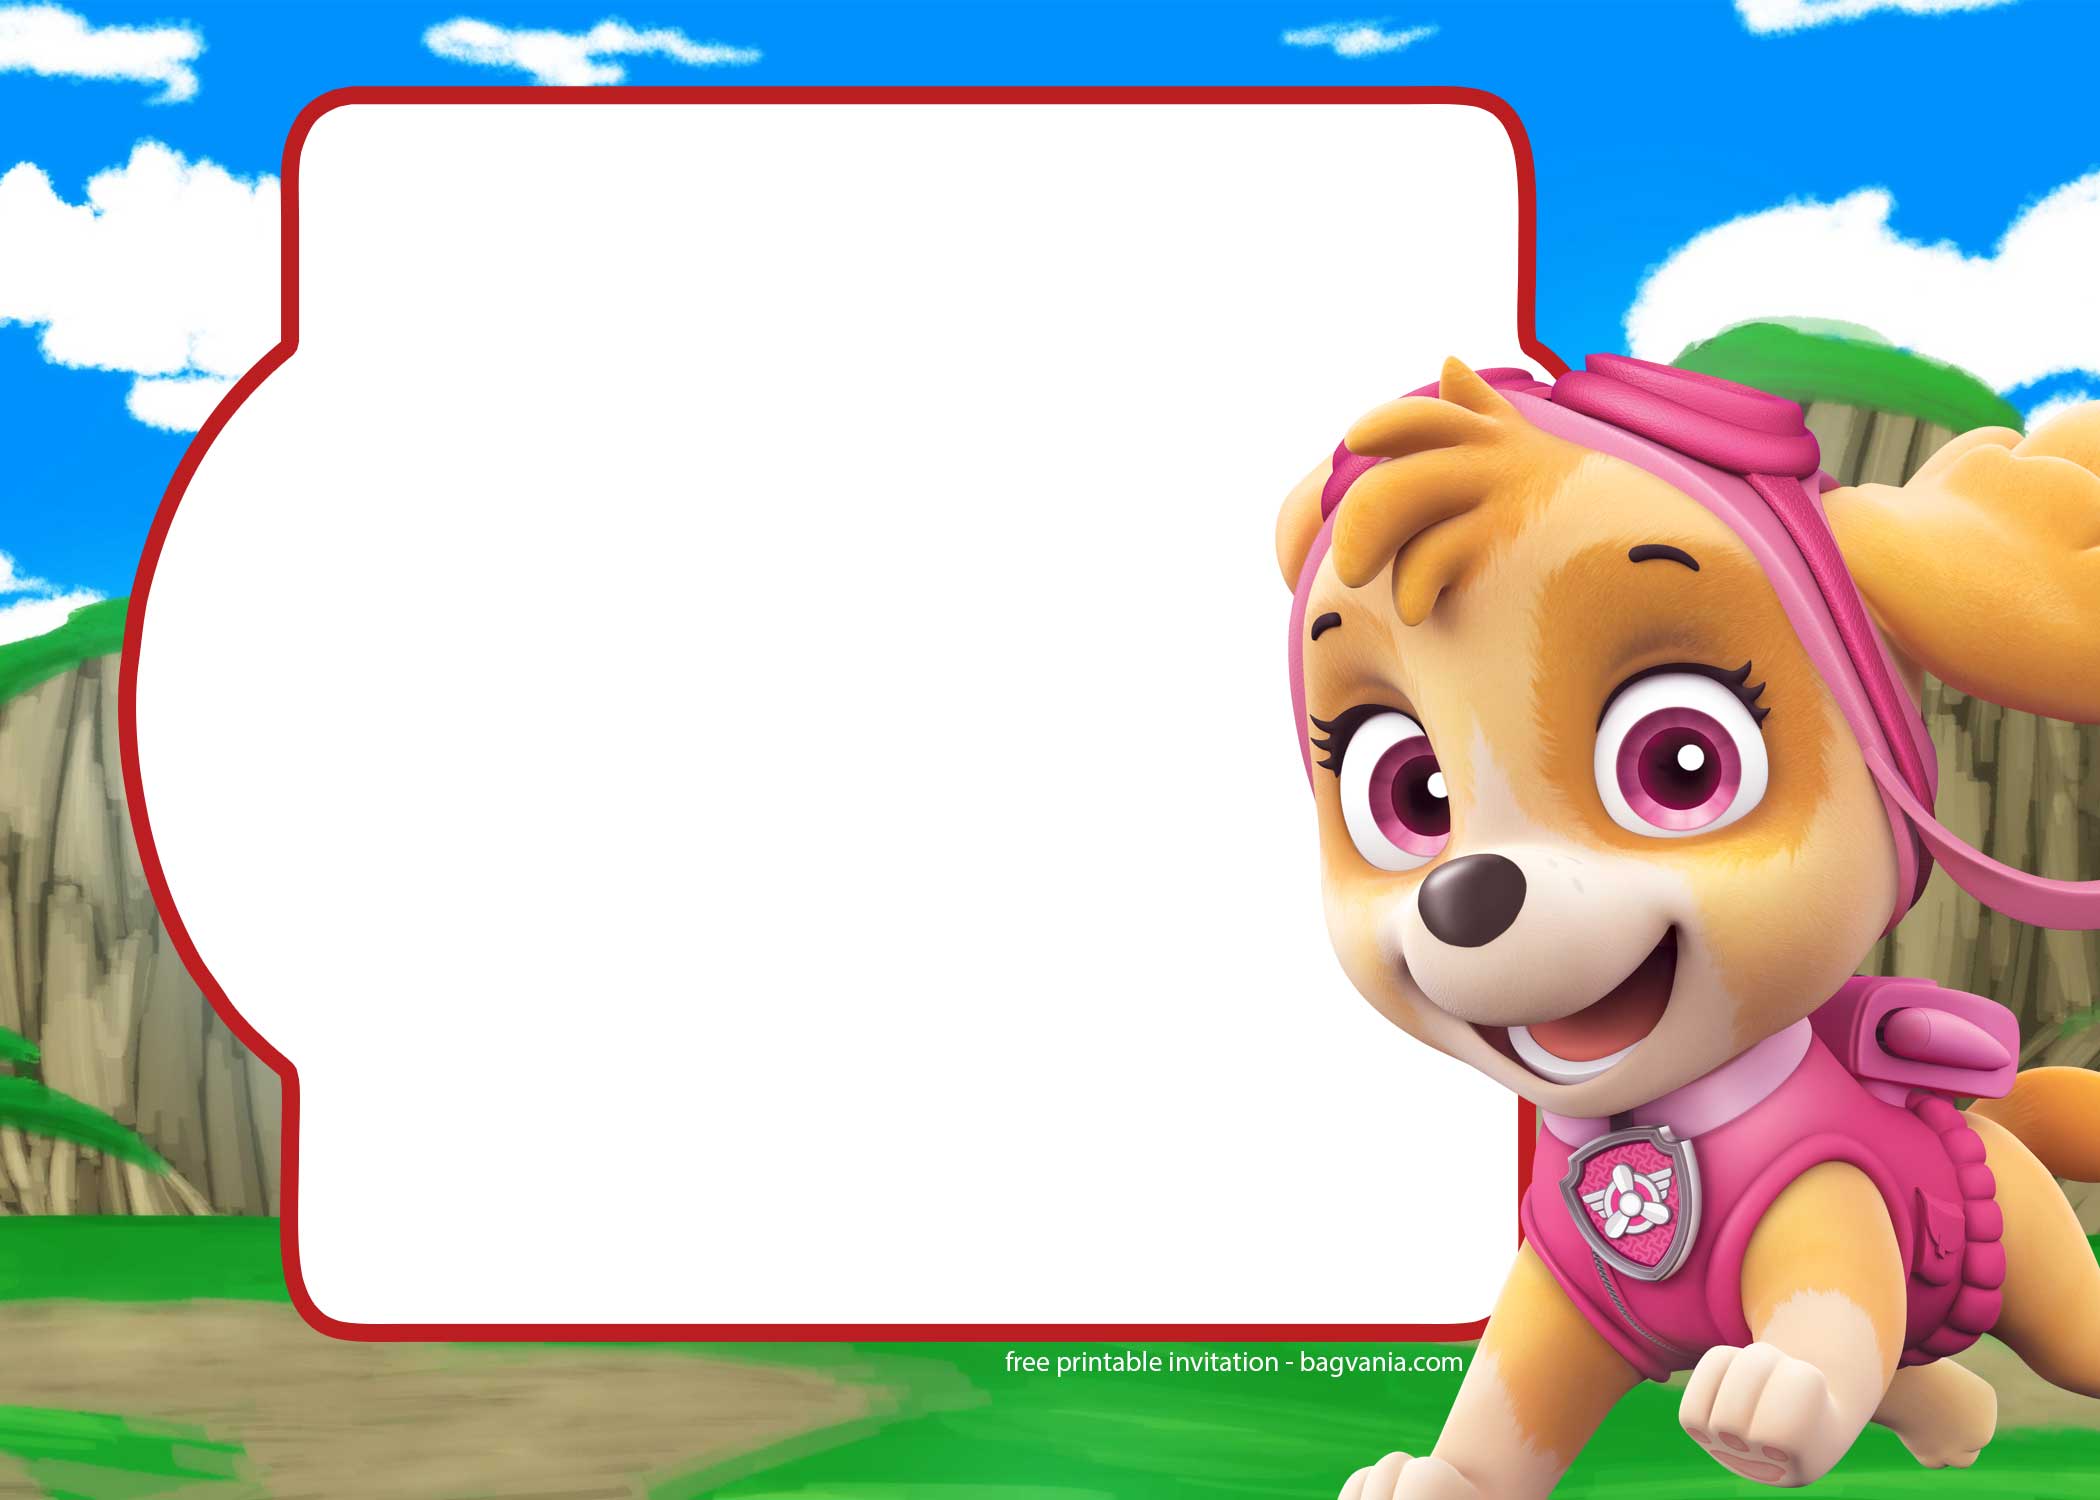 FREE Paw Patrol Invitation Template Complete Collection FREE